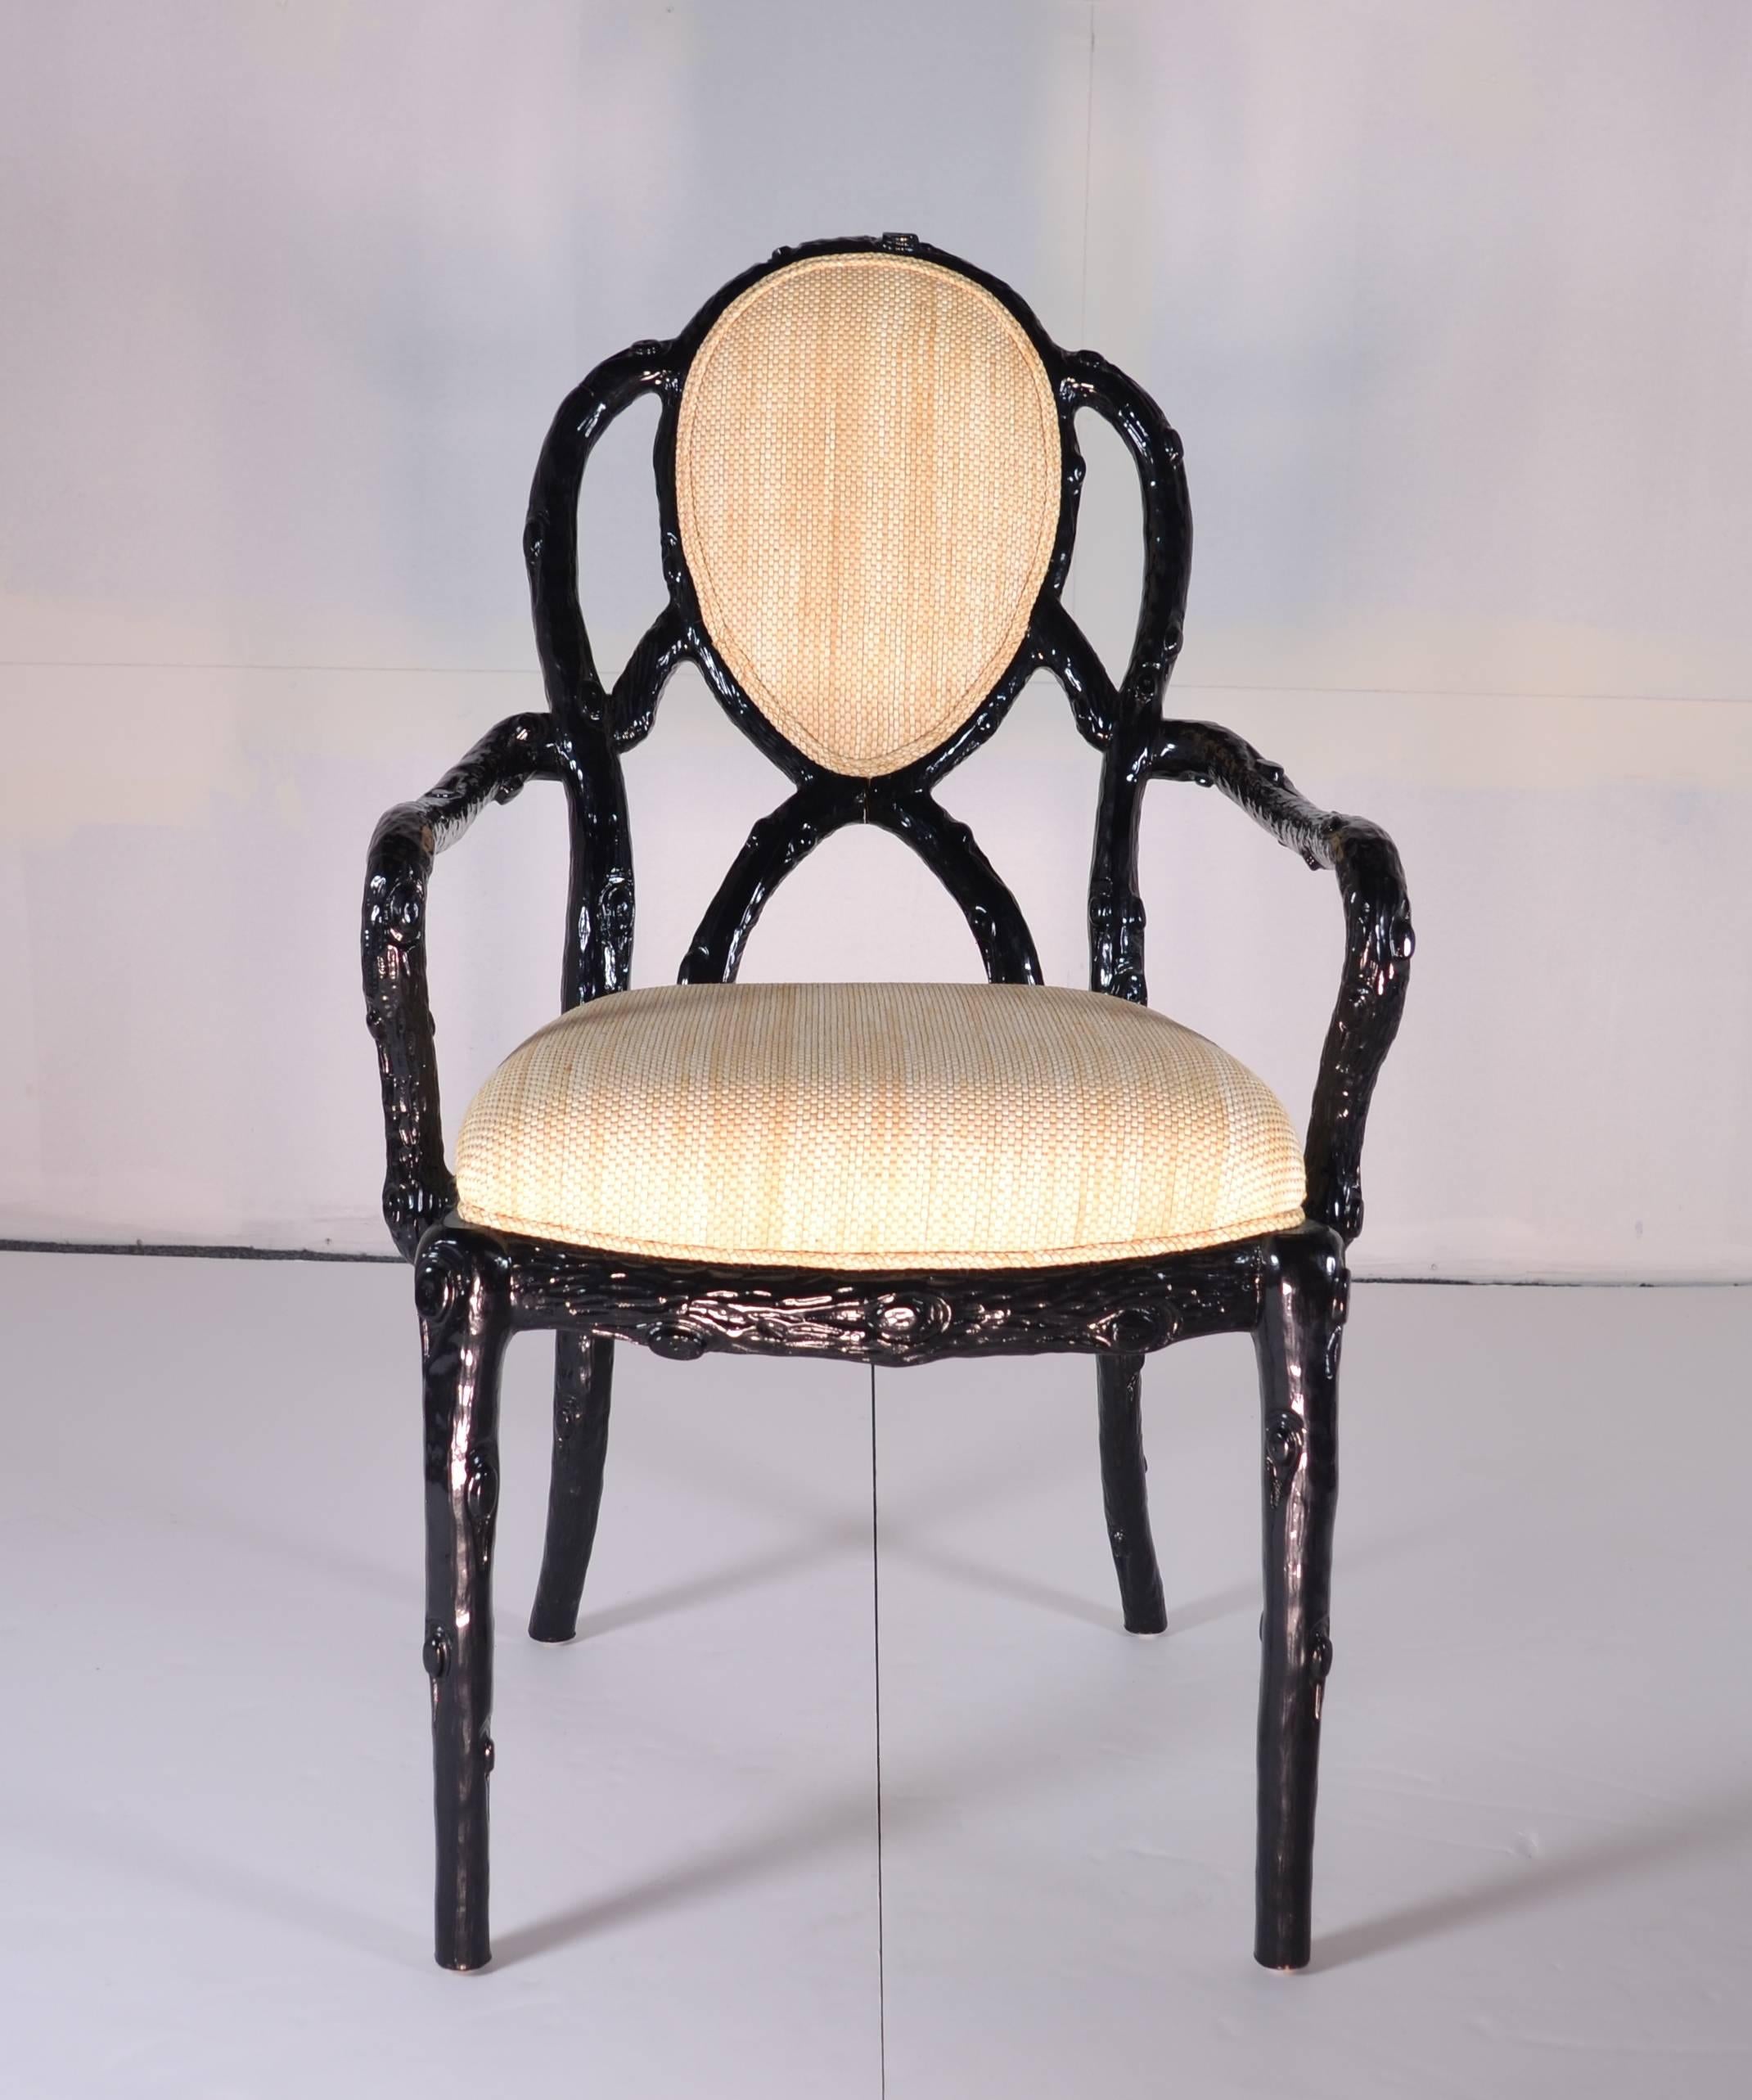 Striking faux bois frames in gloss black with a natural woven cover. Two arms and six sides. Good size and comfortable. Very good condition. See detail photos. The arm chairs measure: 23.5" W X 26" D X 39.5 H; the side chairs measure: